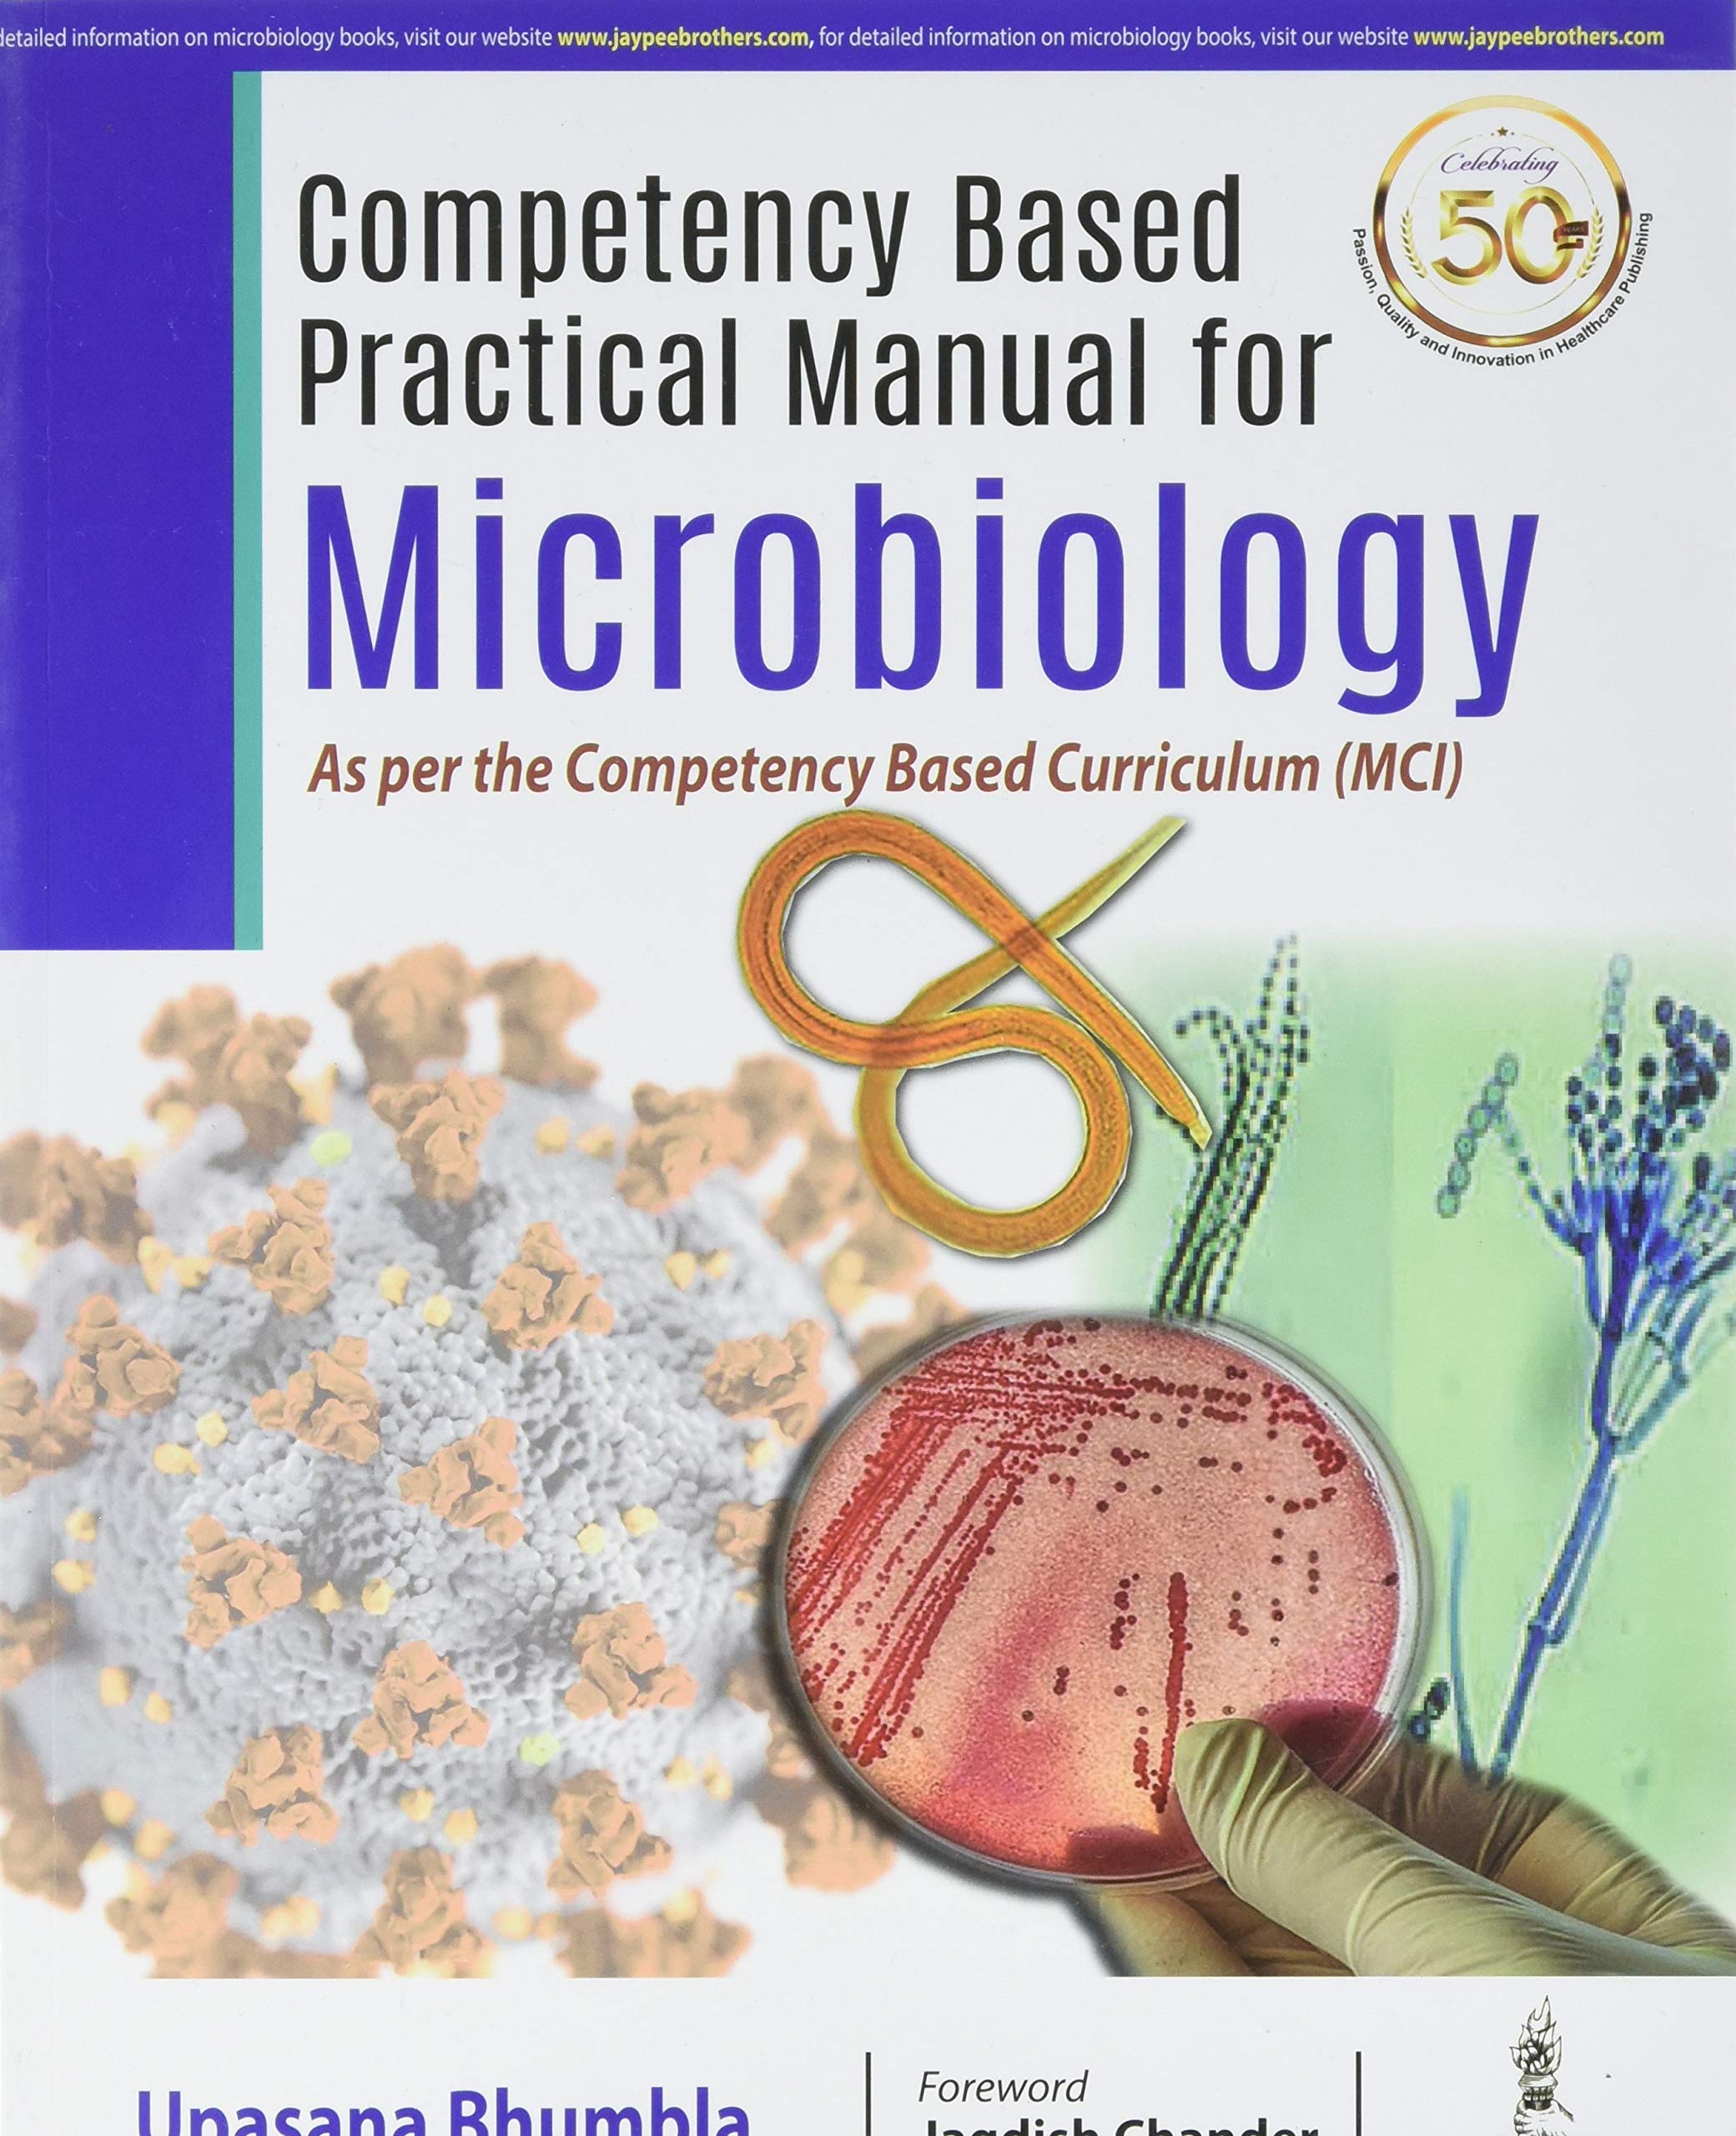 Competency based Practical Manual for Microbiology As per Competency Based Curriculum (MCI) 1st Edition 2021